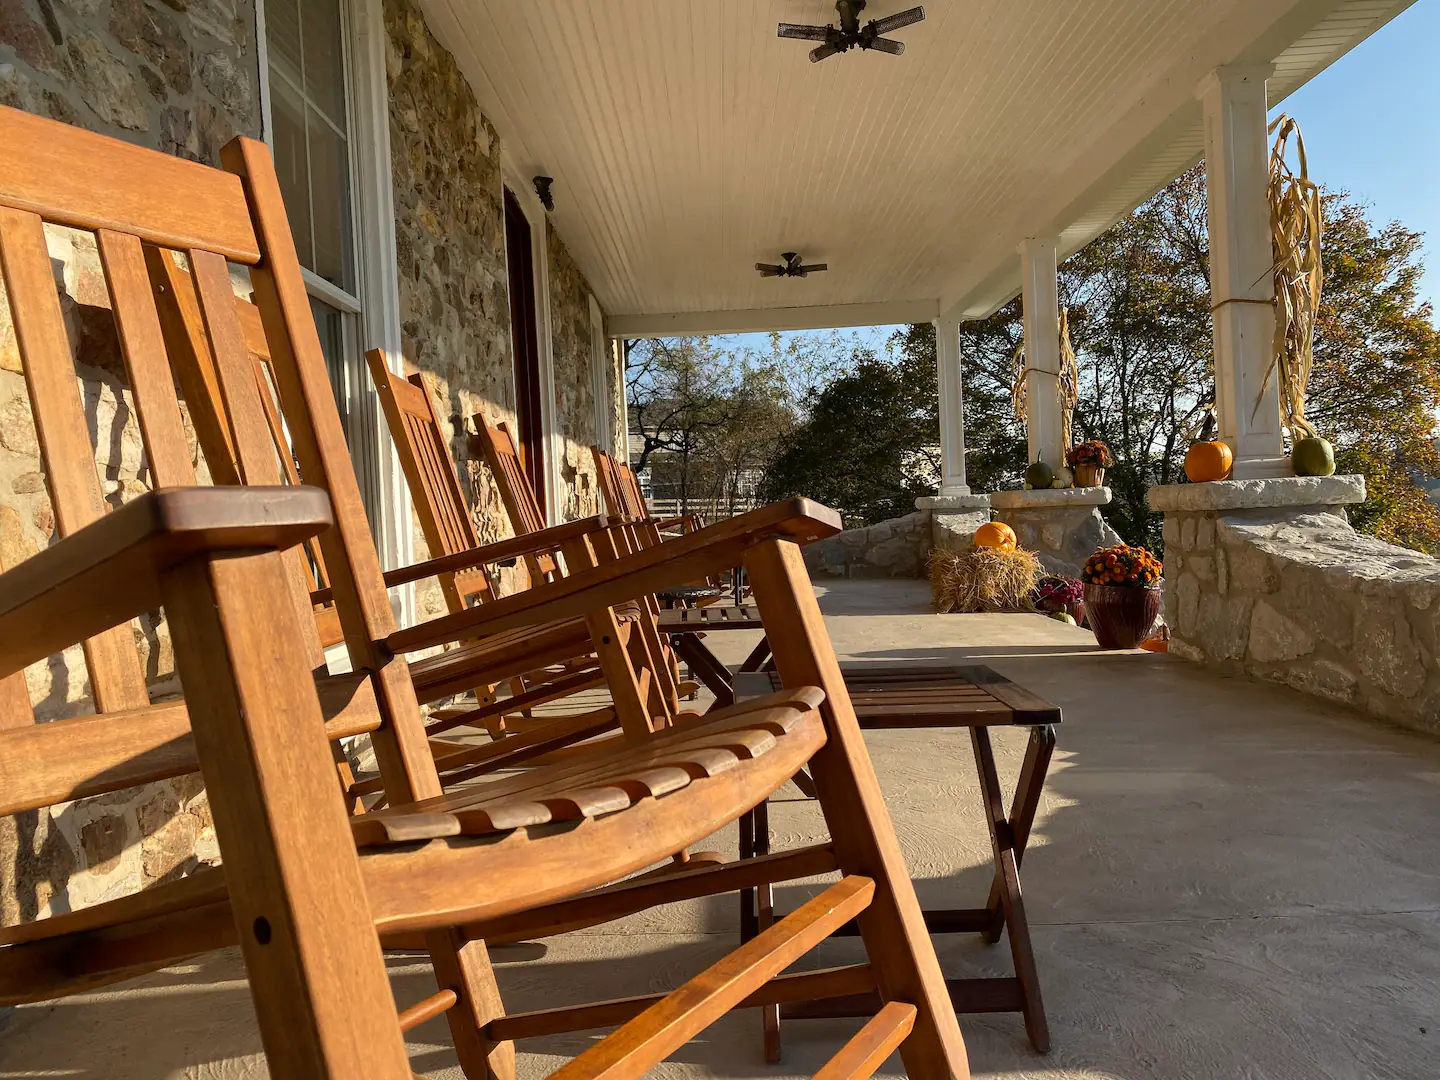 Enjoy the view outside while relaxing in the front porch